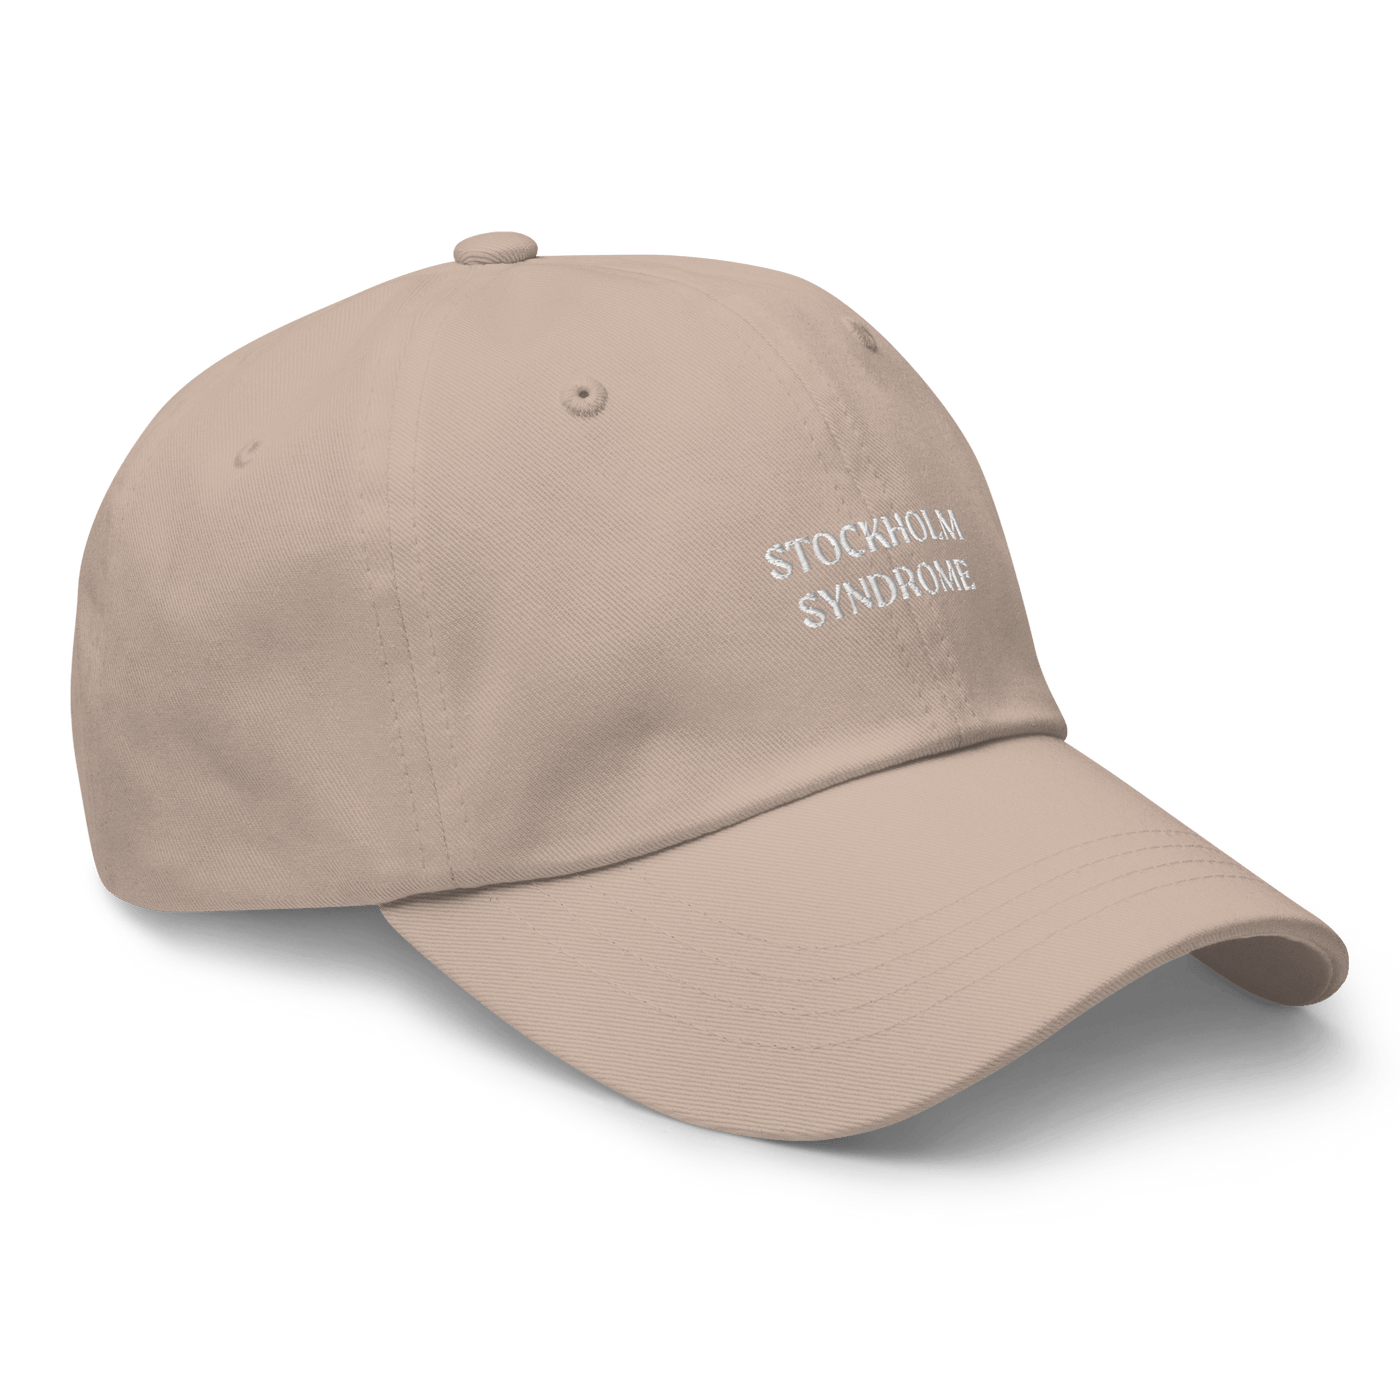 Stockholm Syndrome Dad hat - Stone - - Just Another Cap Store